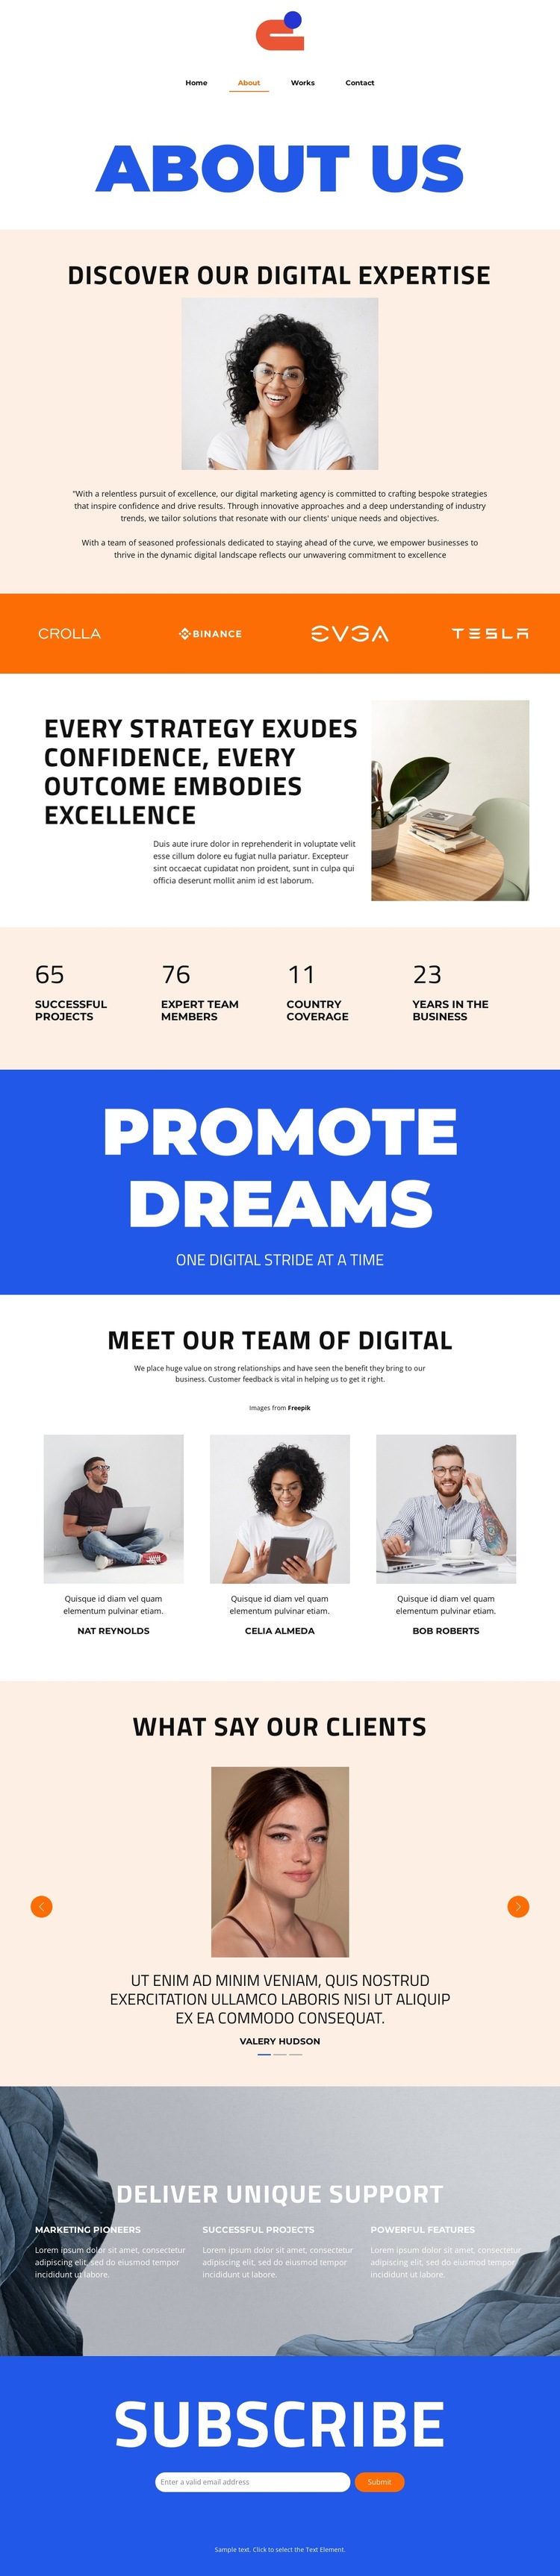 One digital stride at a time HTML5 Template